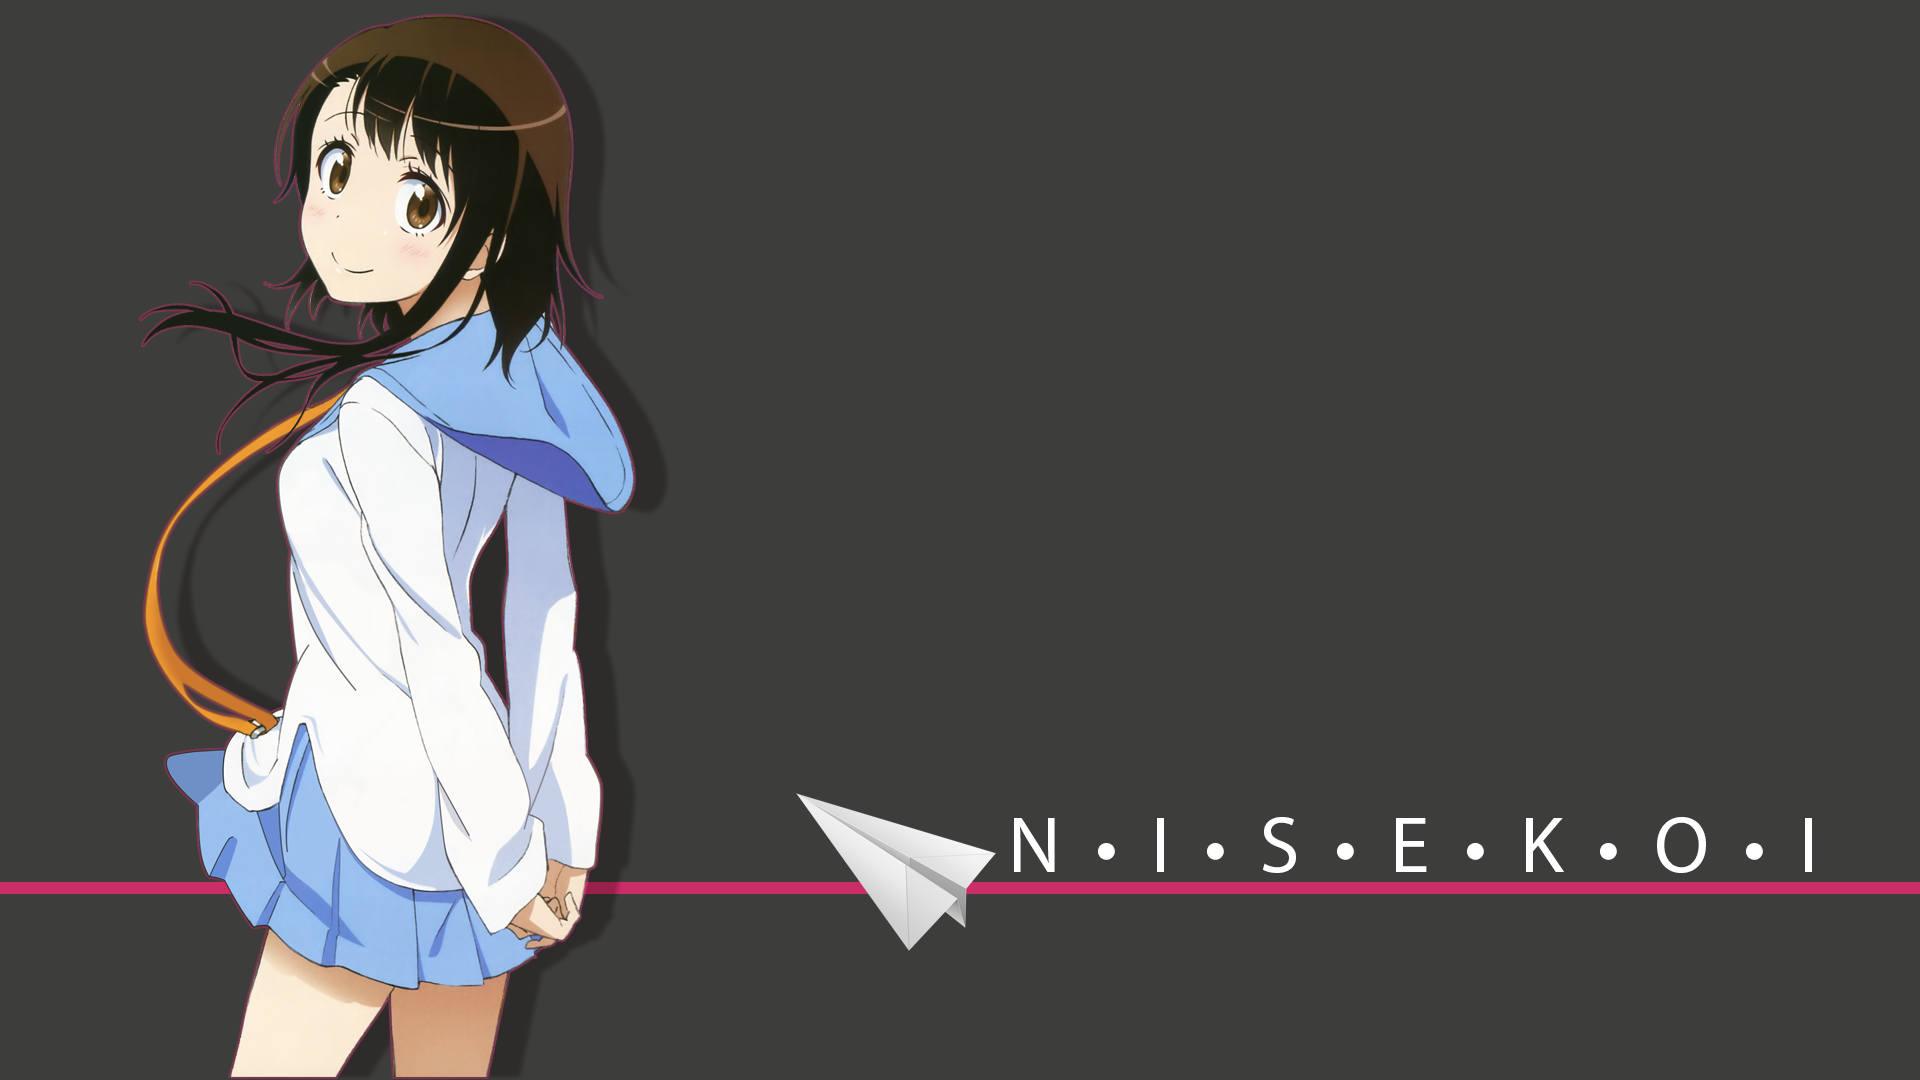 Nisekoi Hd Wallpaper Background Image 1920x1080 Id 701516 Images, Photos, Reviews